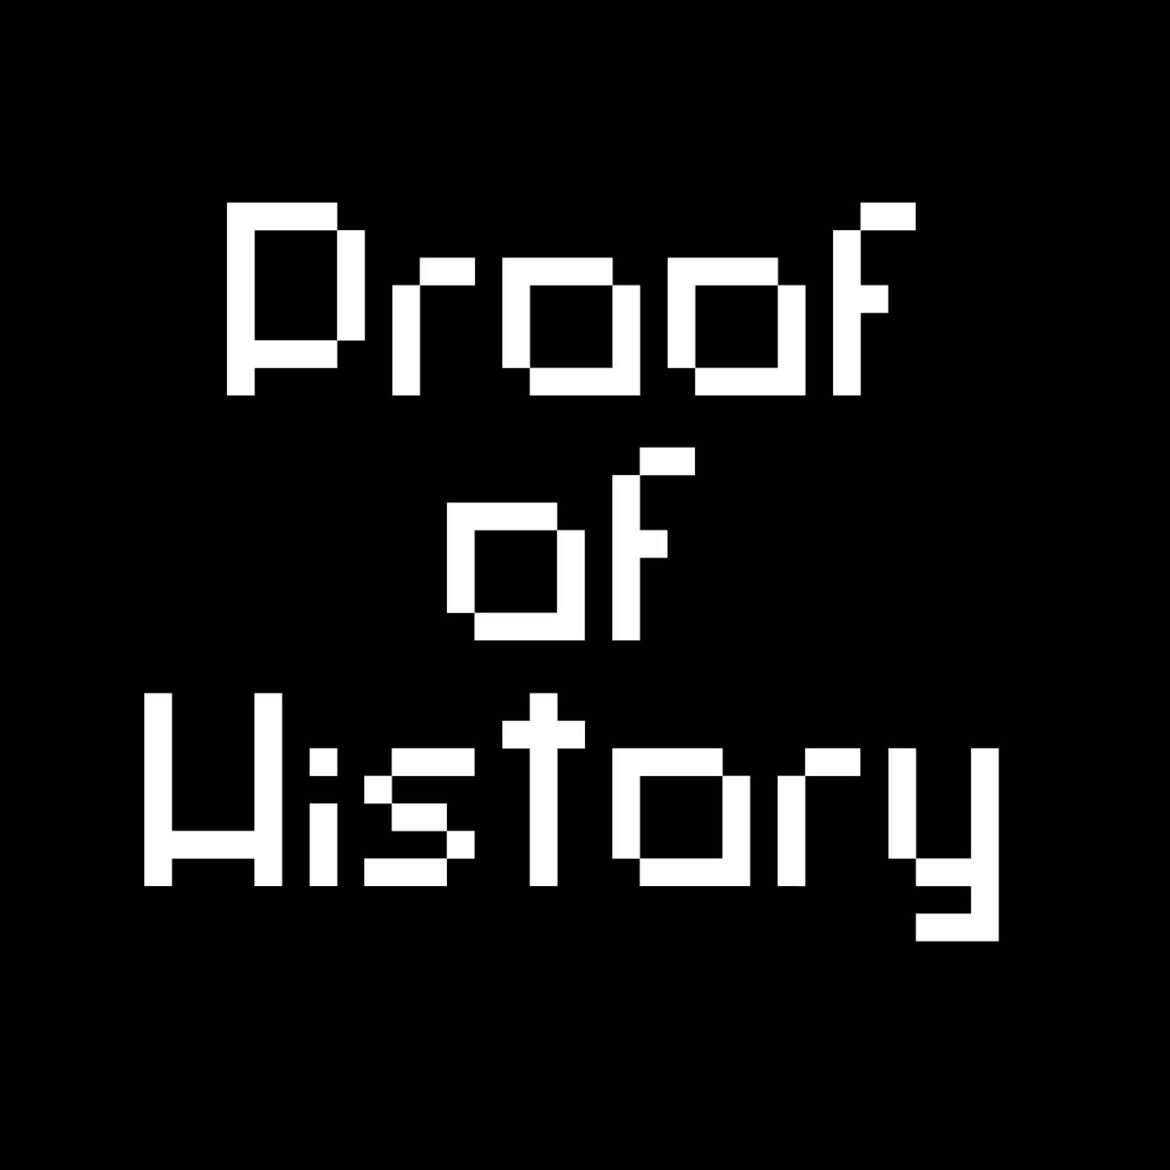 Proof-of-History (PoH)